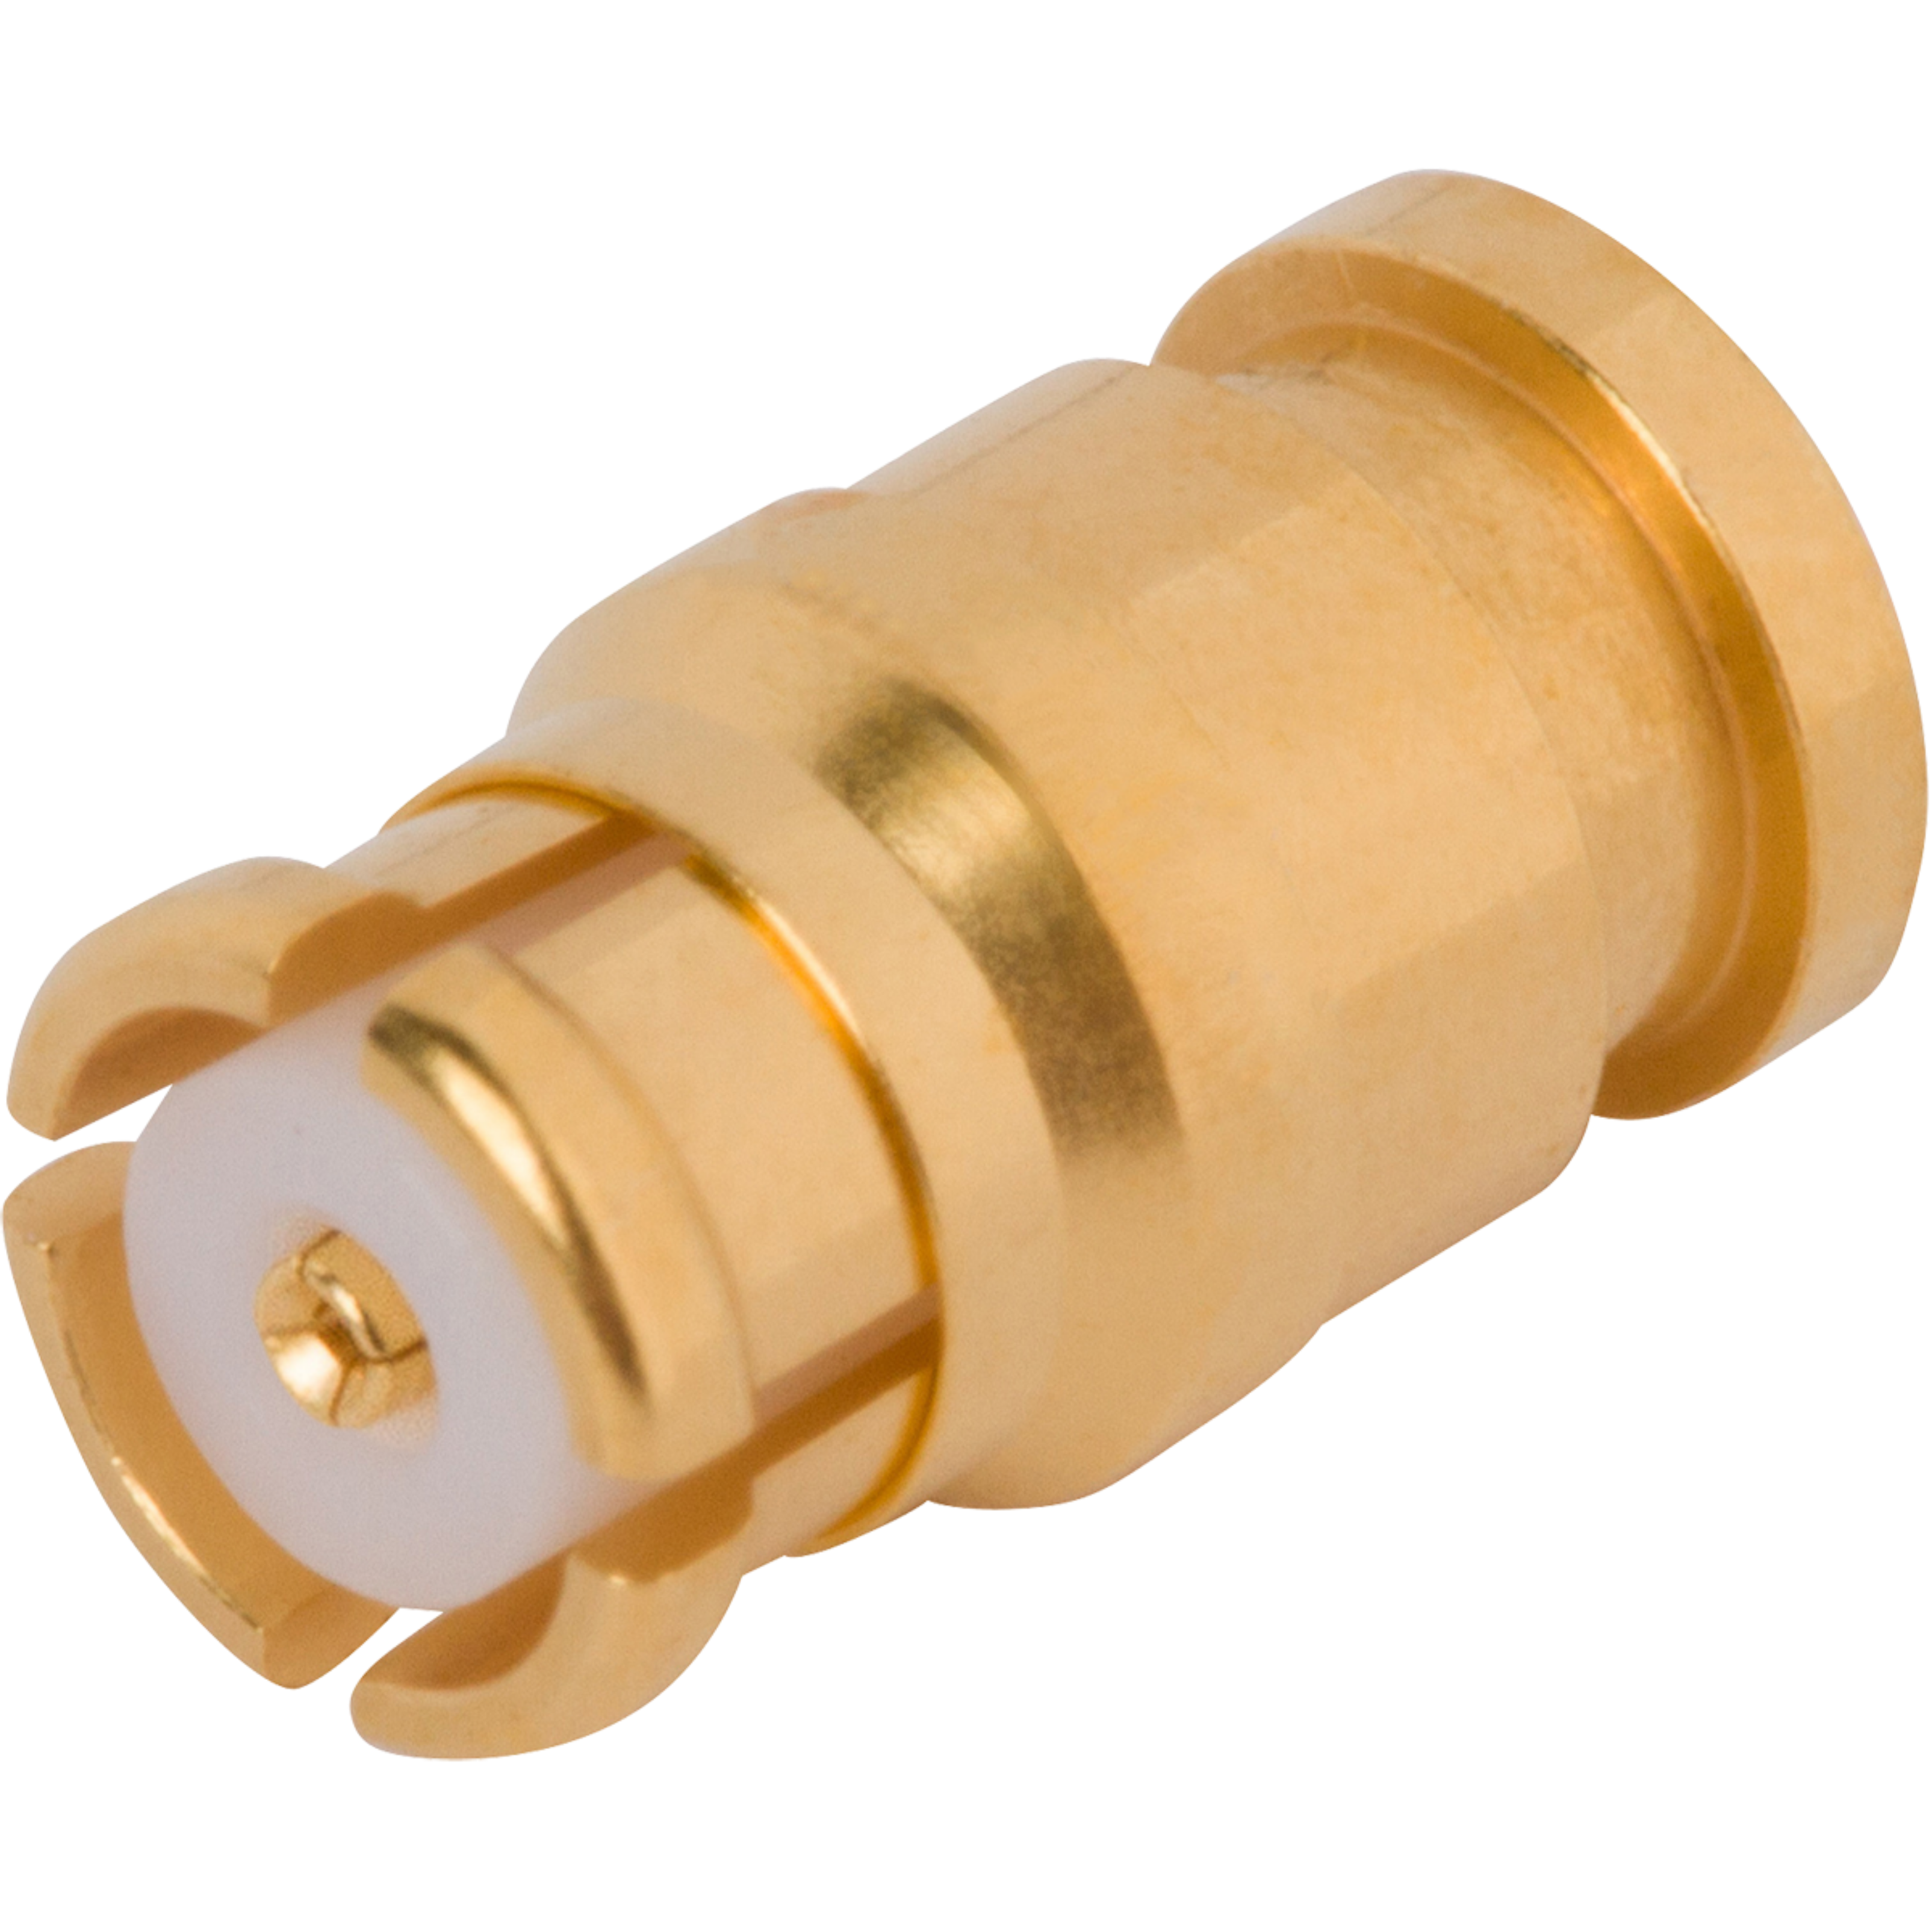 SMP Female Connector for .047 Cable, 1221-4010